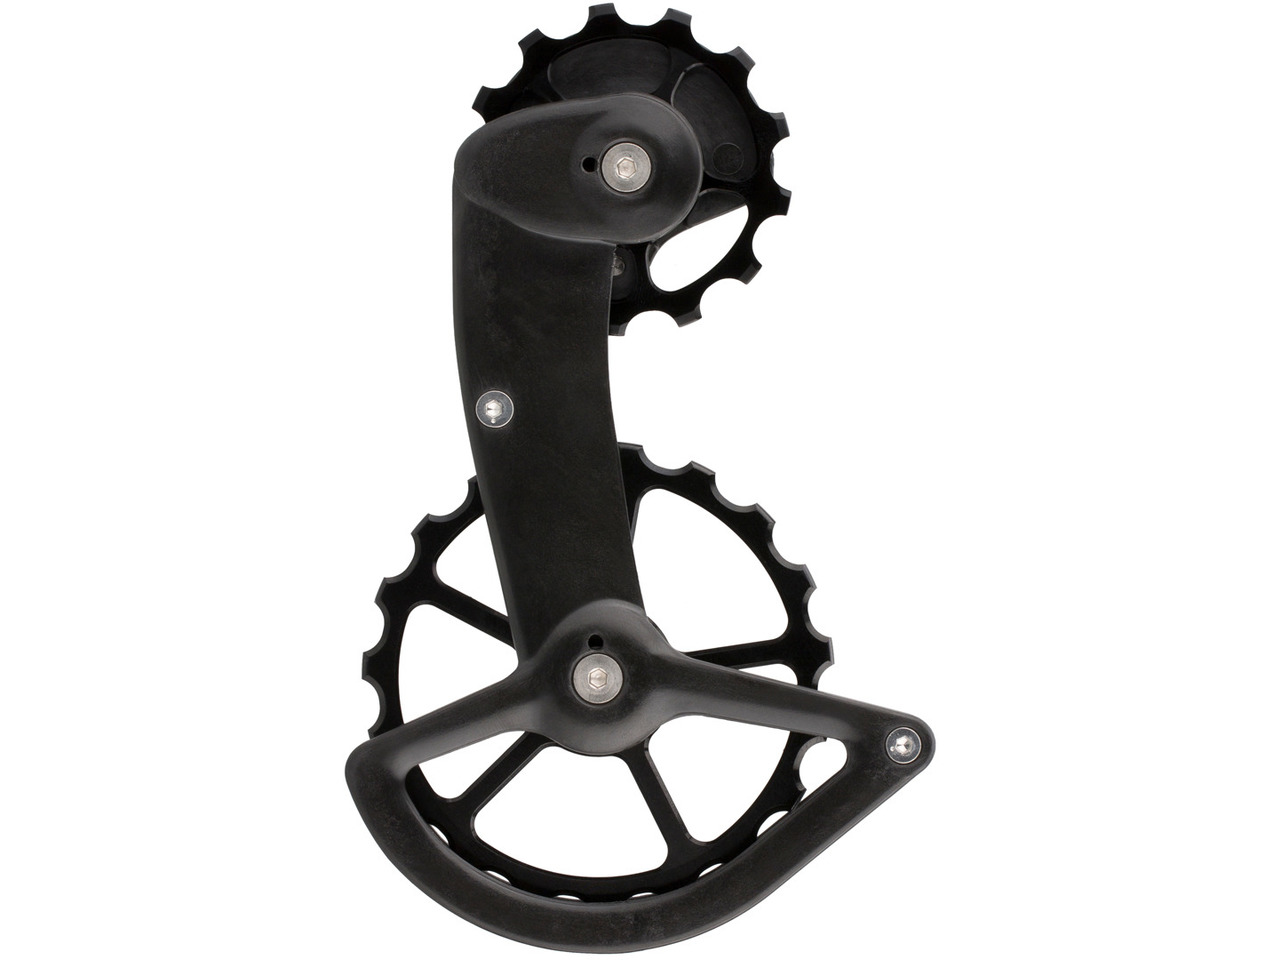 Roldan Road oversized pulley ospw Cage for Shimano Dura-Ace/ultegra r8000/r9100 BK